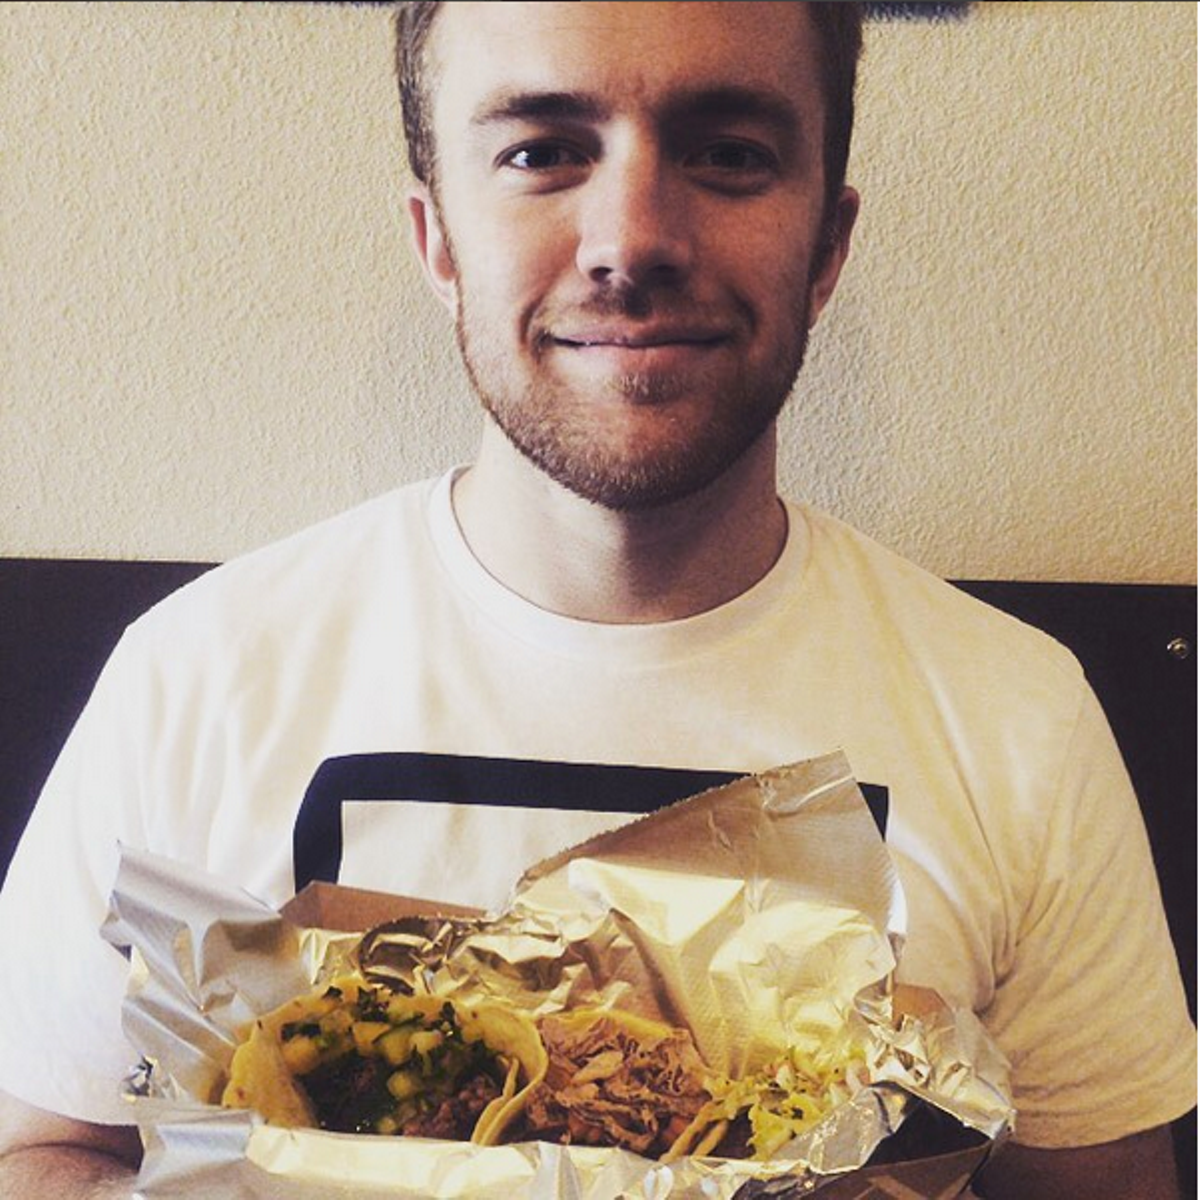 Hot Guys Eating Tacos Is Our New Favorite Instagram Account | San ...